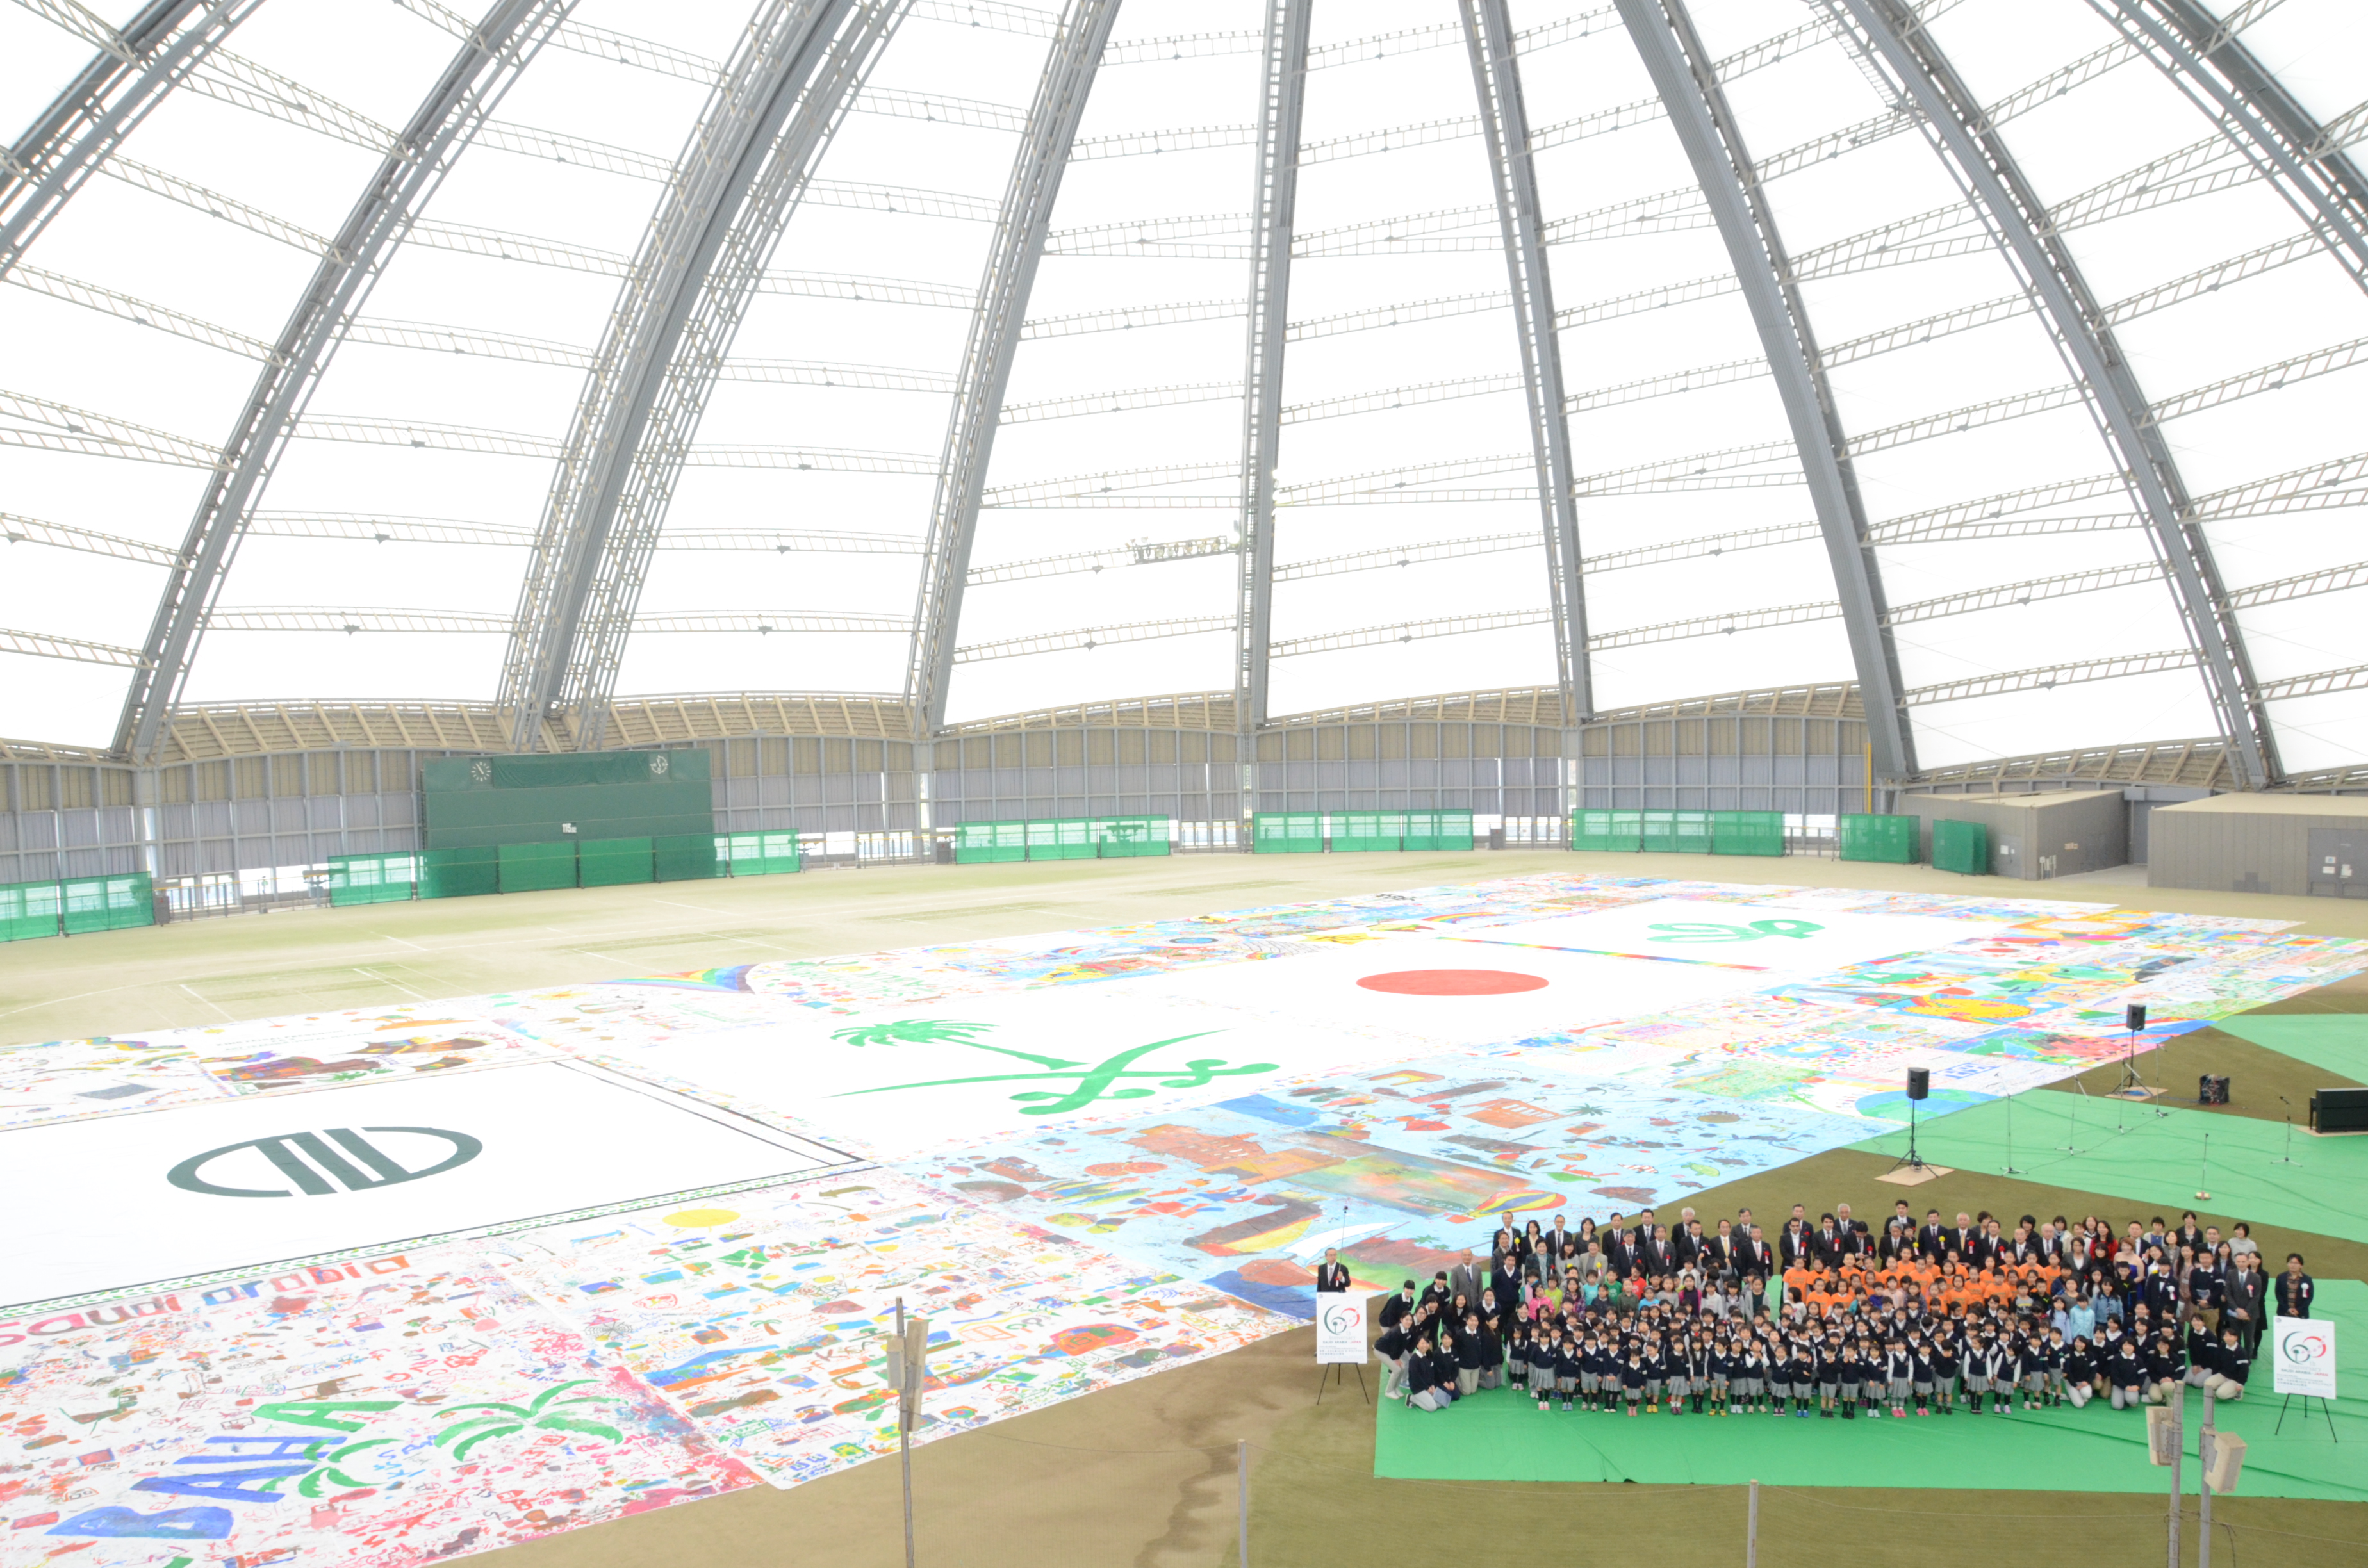 We held as an official 60th anniversary event and also as a memorial event for 5 years of recovery from East Japan Earthquake "The Biggest Painting in the World 2015 60th Anniversary of Establishing Diplomatic Relationship between Saudi Arabia and Japan".